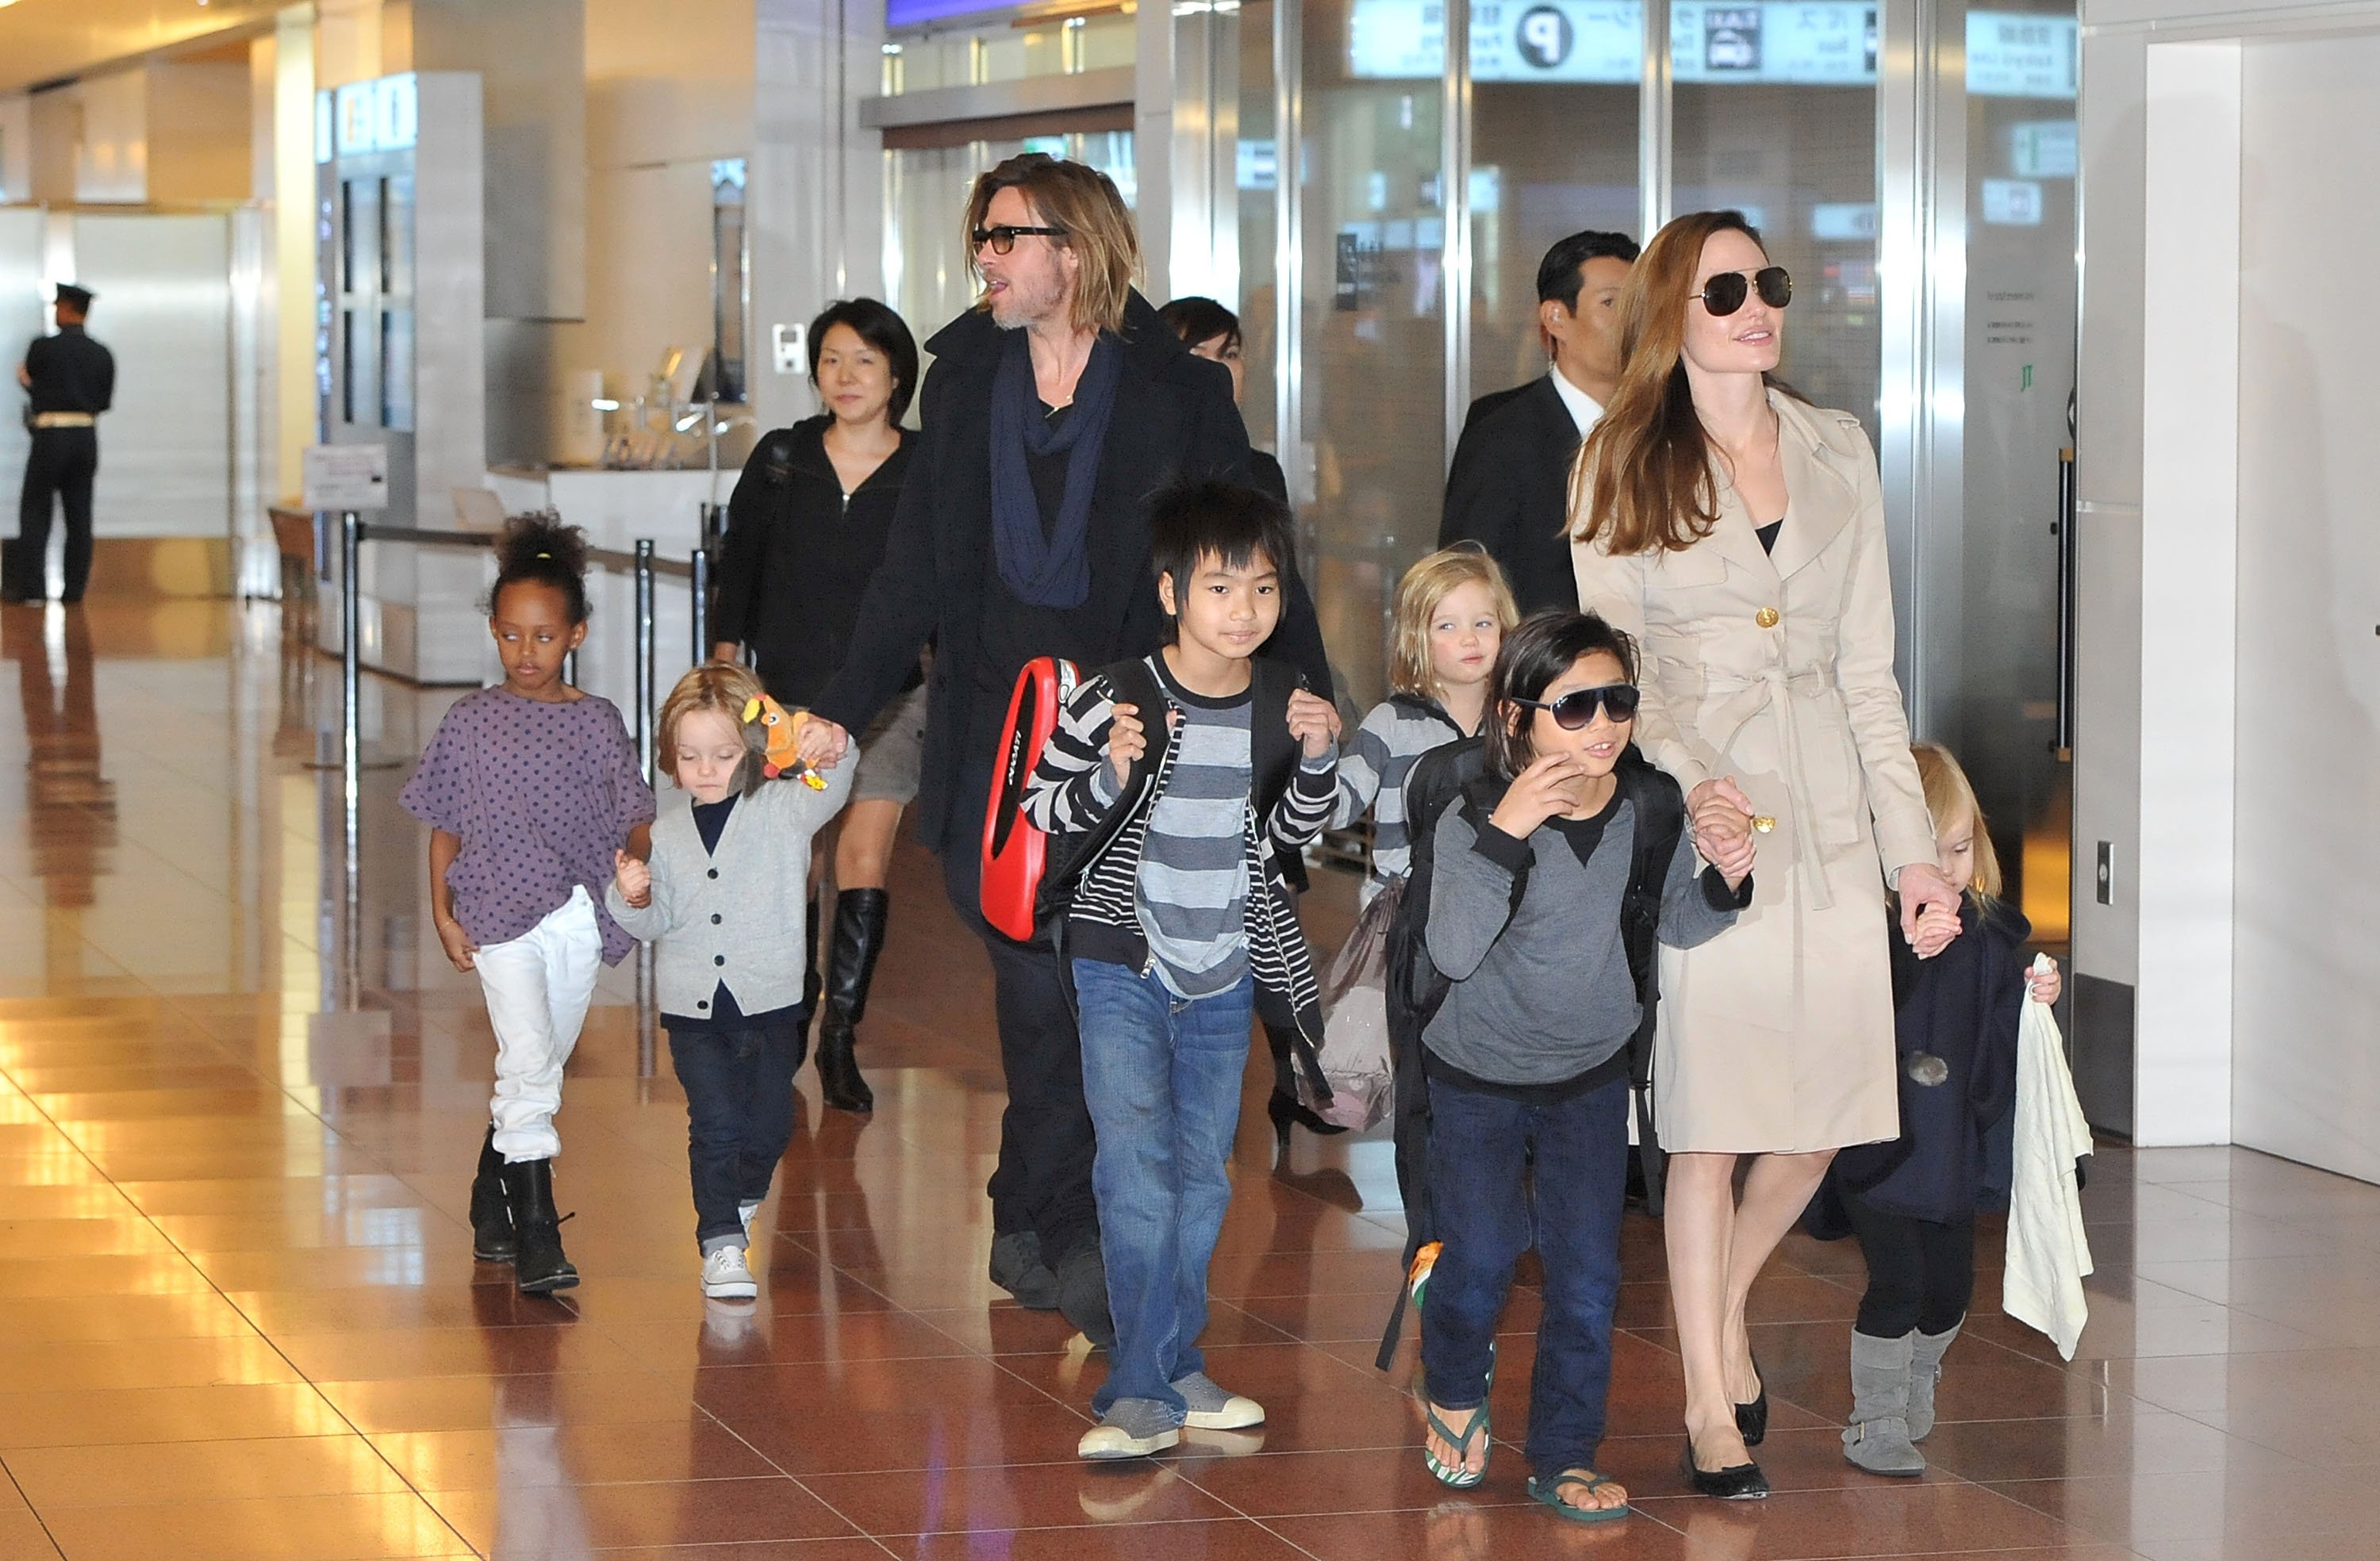  Brad Pitt, Angelina Jolie and their six children arrive at Haneda International Airport on November 8 in Tokyo, Japan. | Photo: Getty Images